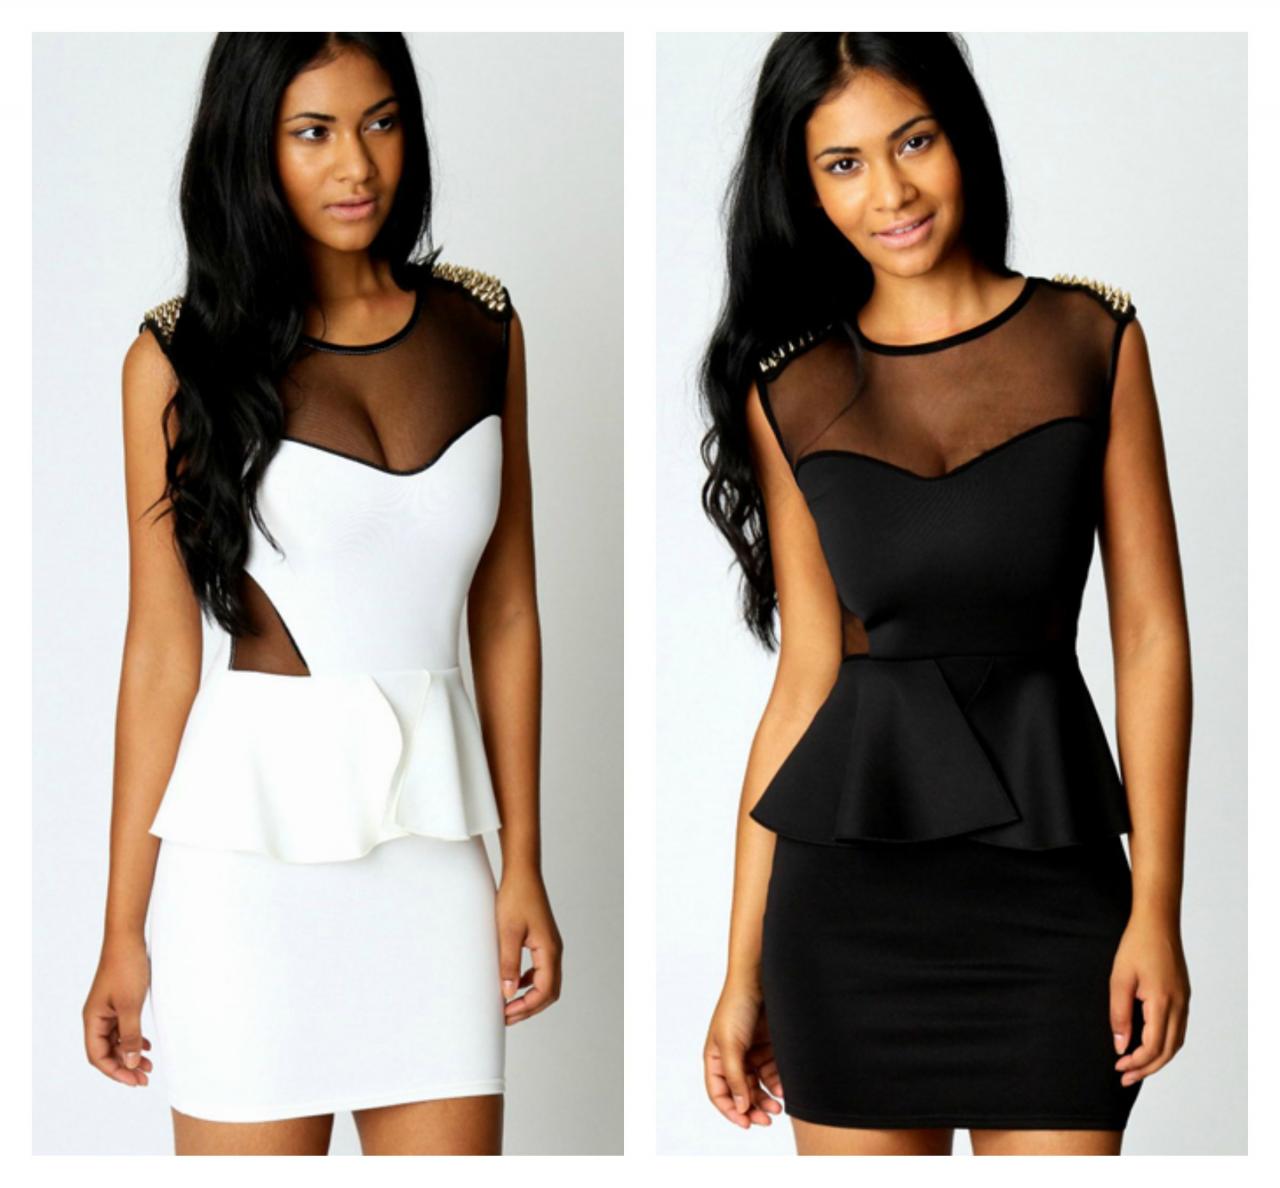 Studded Mesh Design Sexy Peplum Dress In Red, White And Black